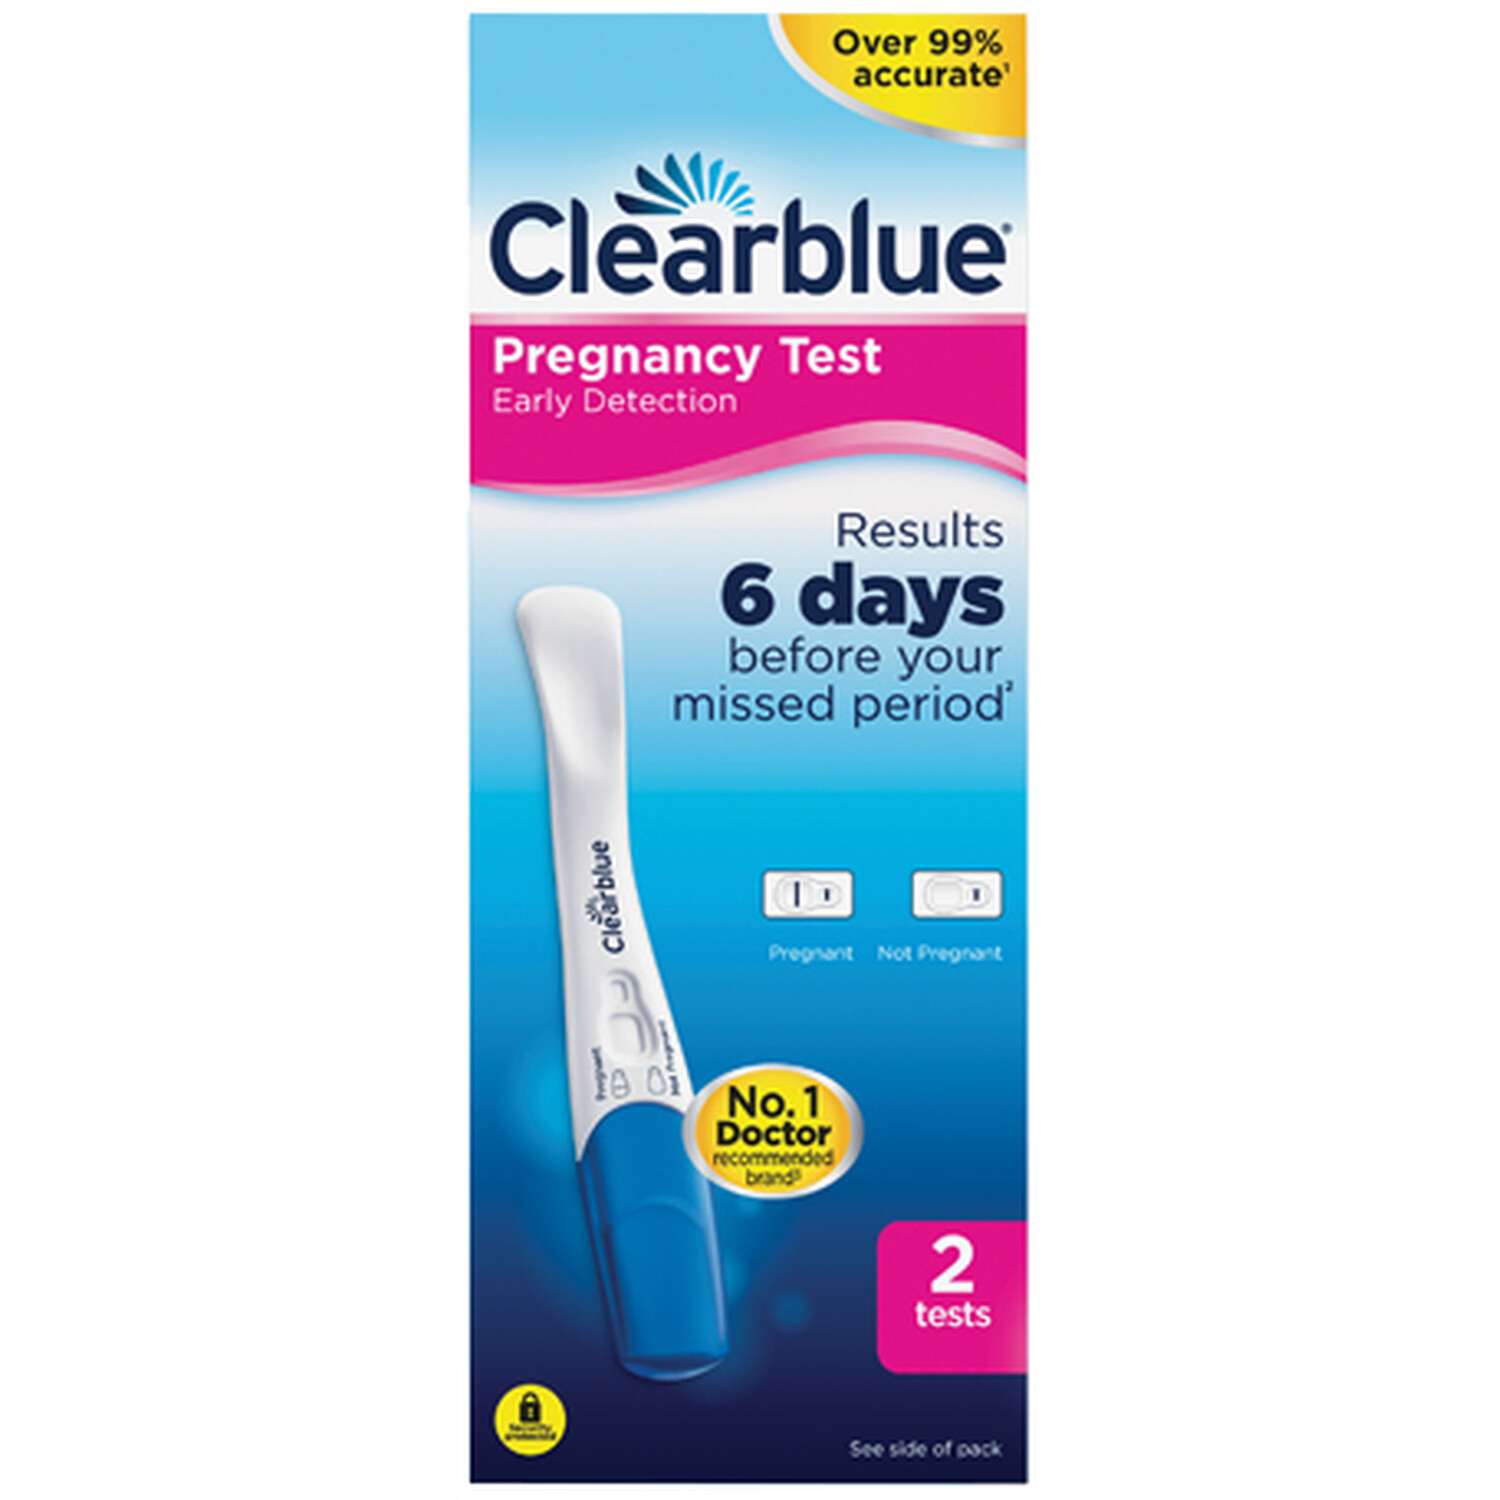 Clearblue Early Detection Pregnancy Test 2 Pack Image